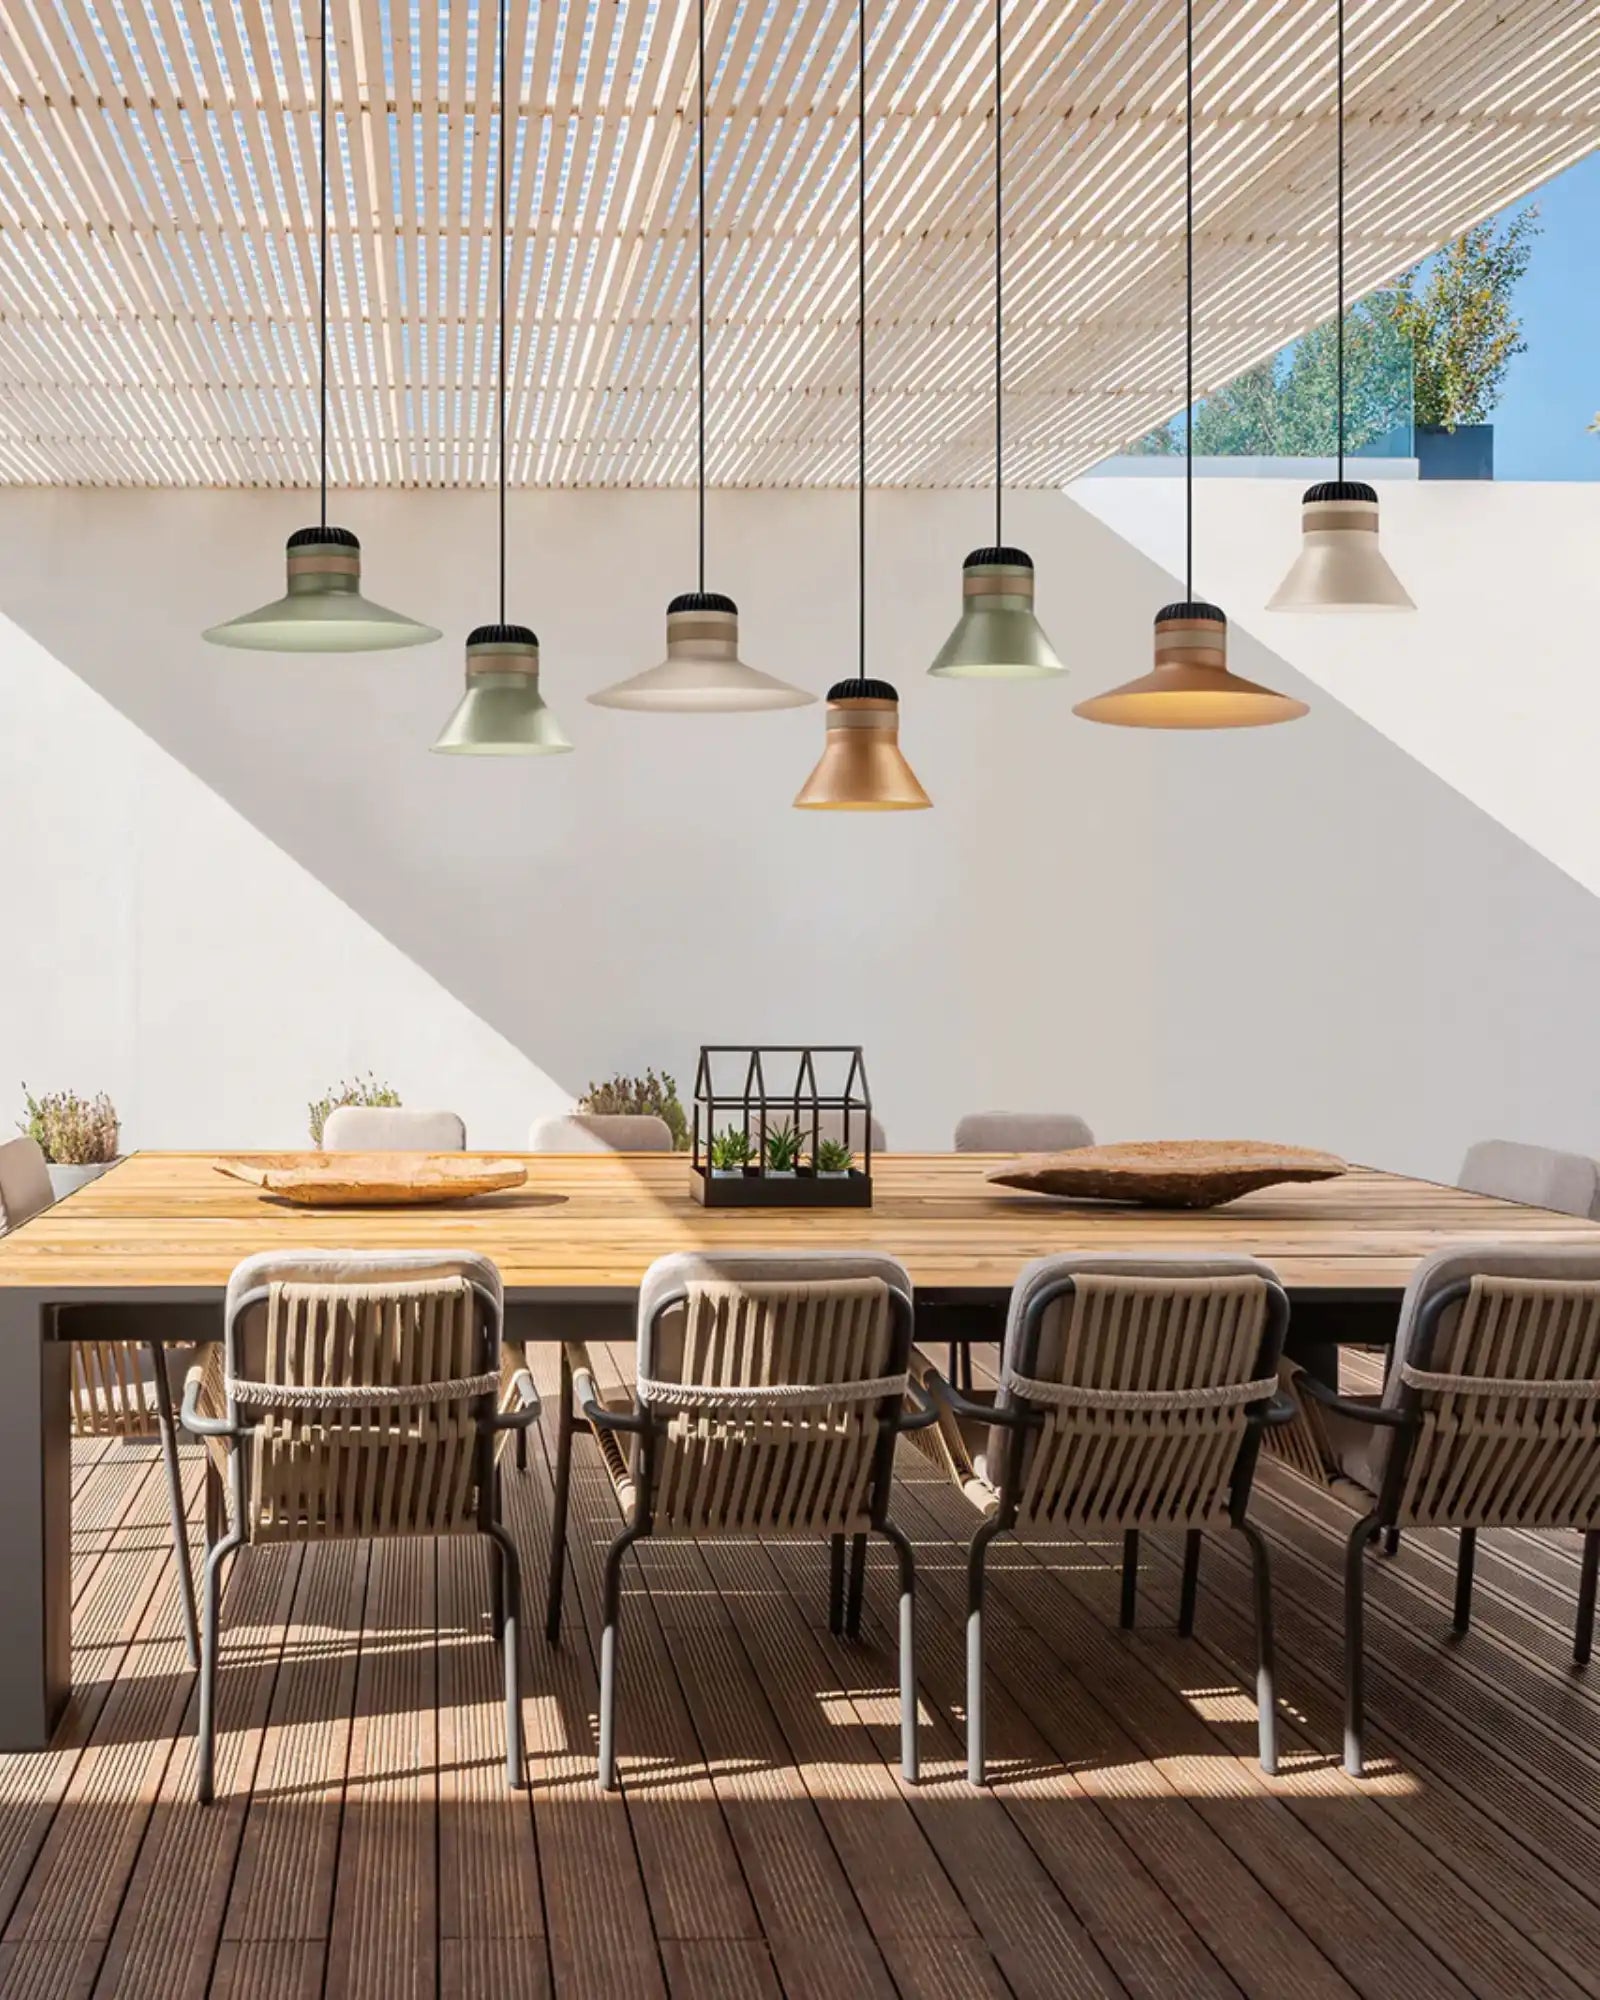 Cordea Outdoor Pendant Light by Masiero Lighting featured in an outdoor dining area | Nook Collections